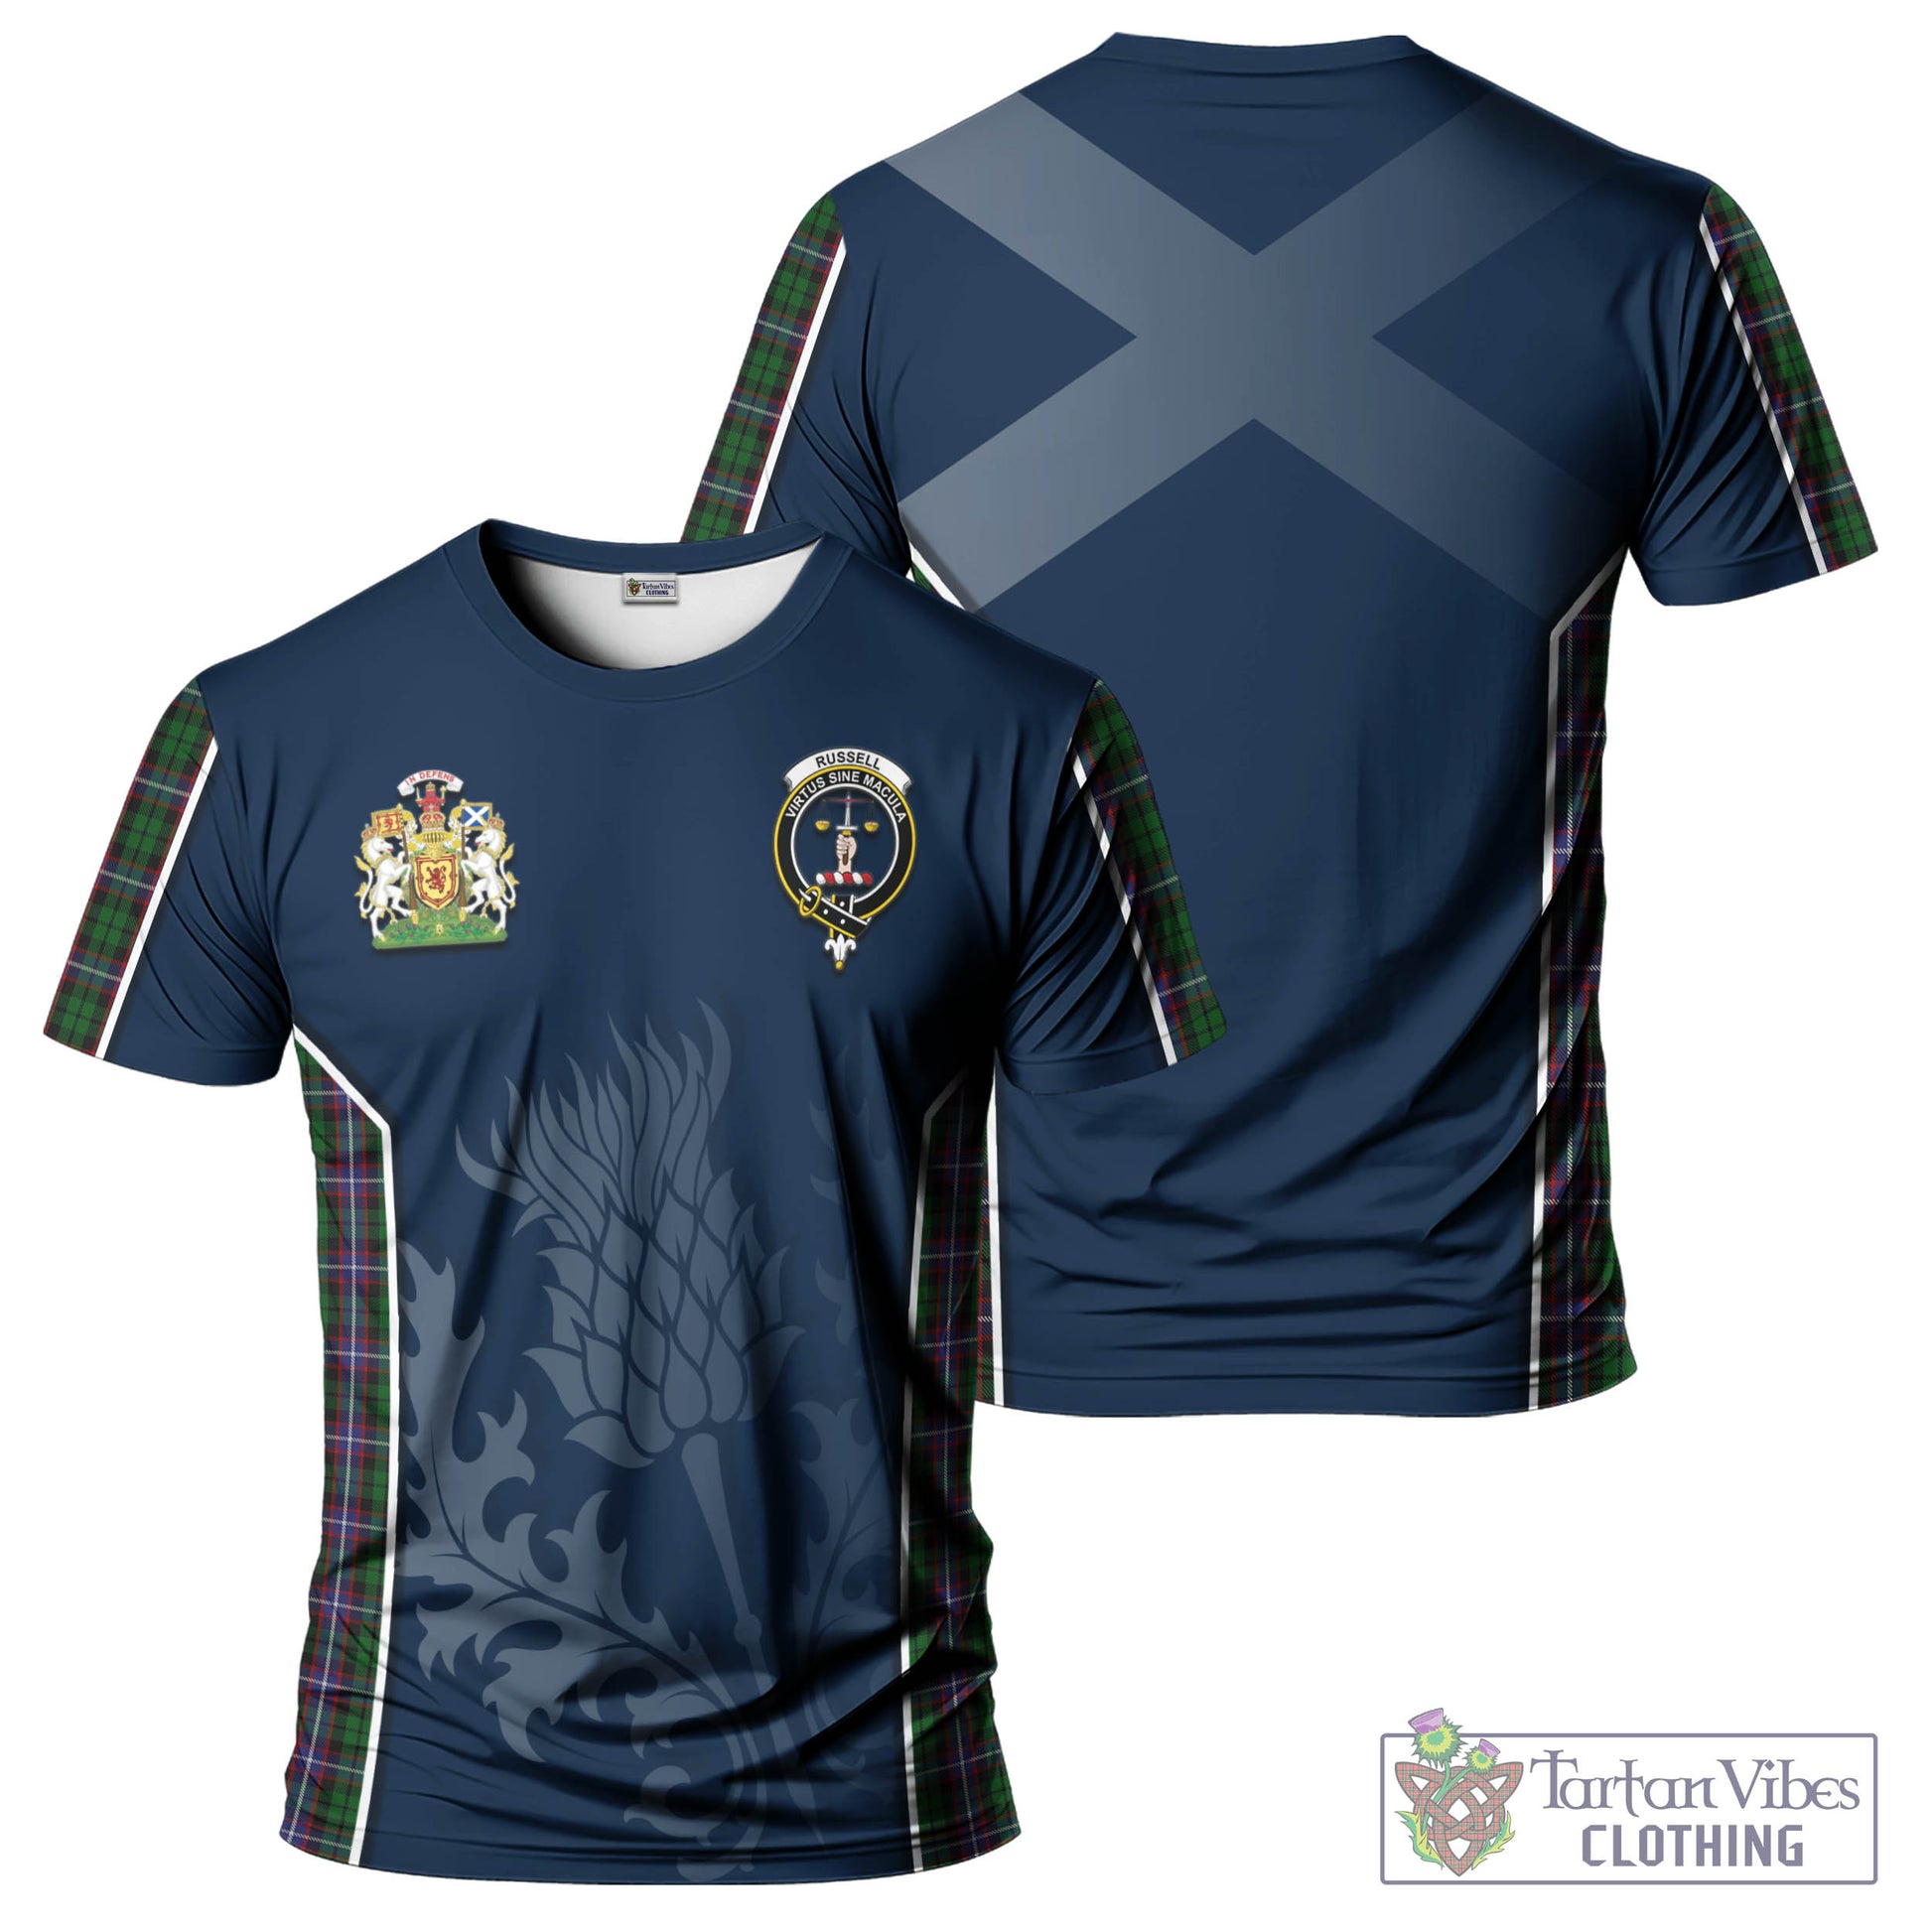 Tartan Vibes Clothing Russell Tartan T-Shirt with Family Crest and Scottish Thistle Vibes Sport Style